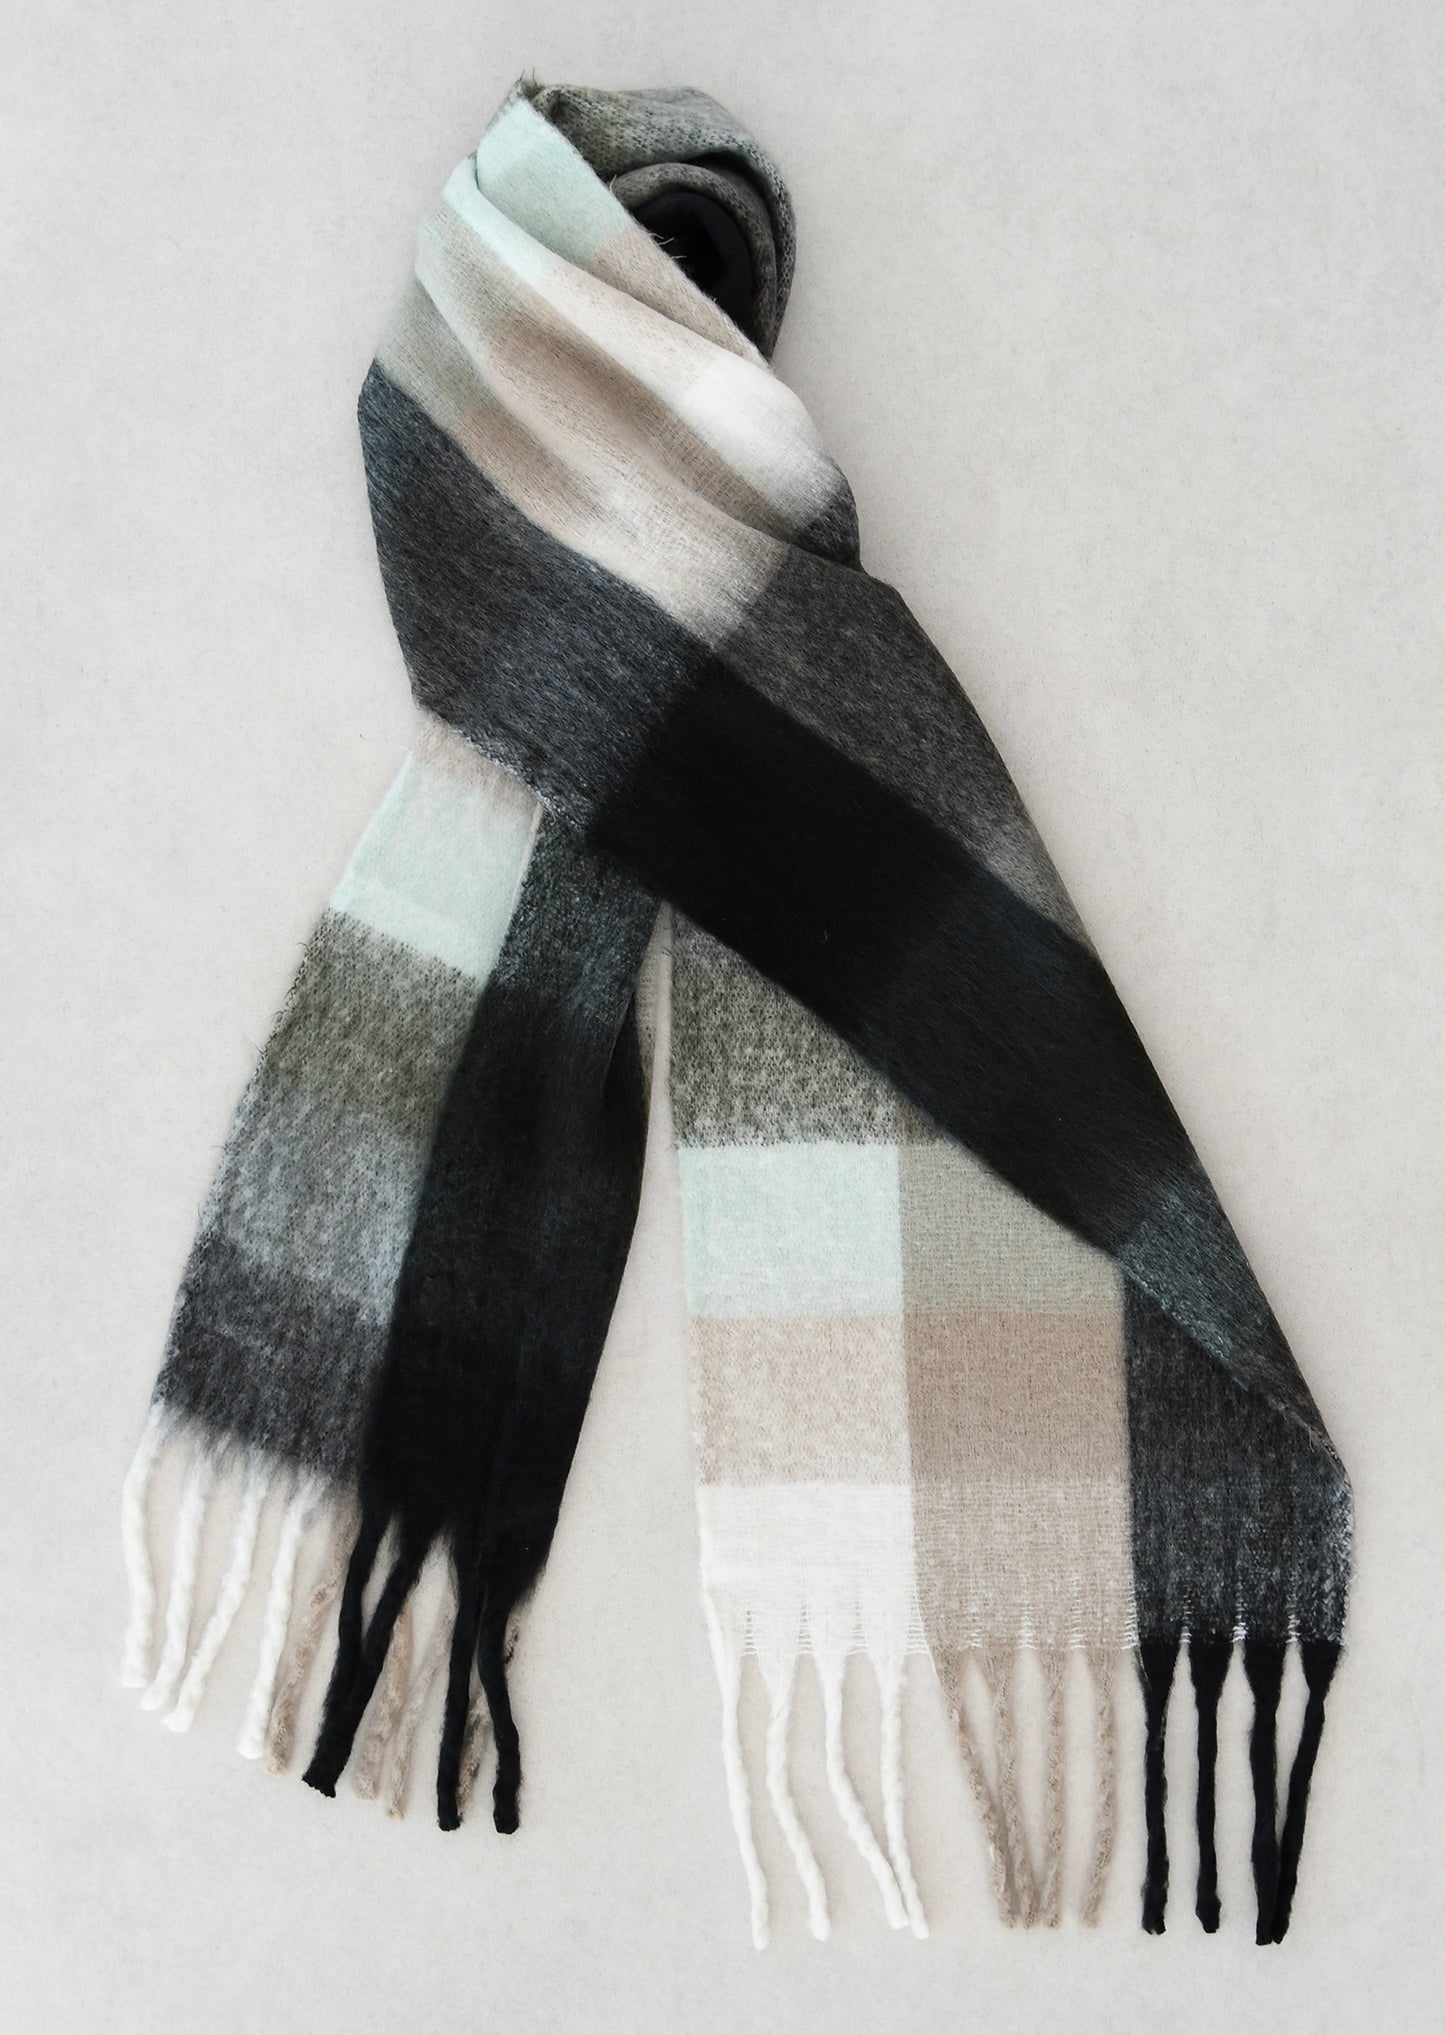 Checked wool-blend scarf